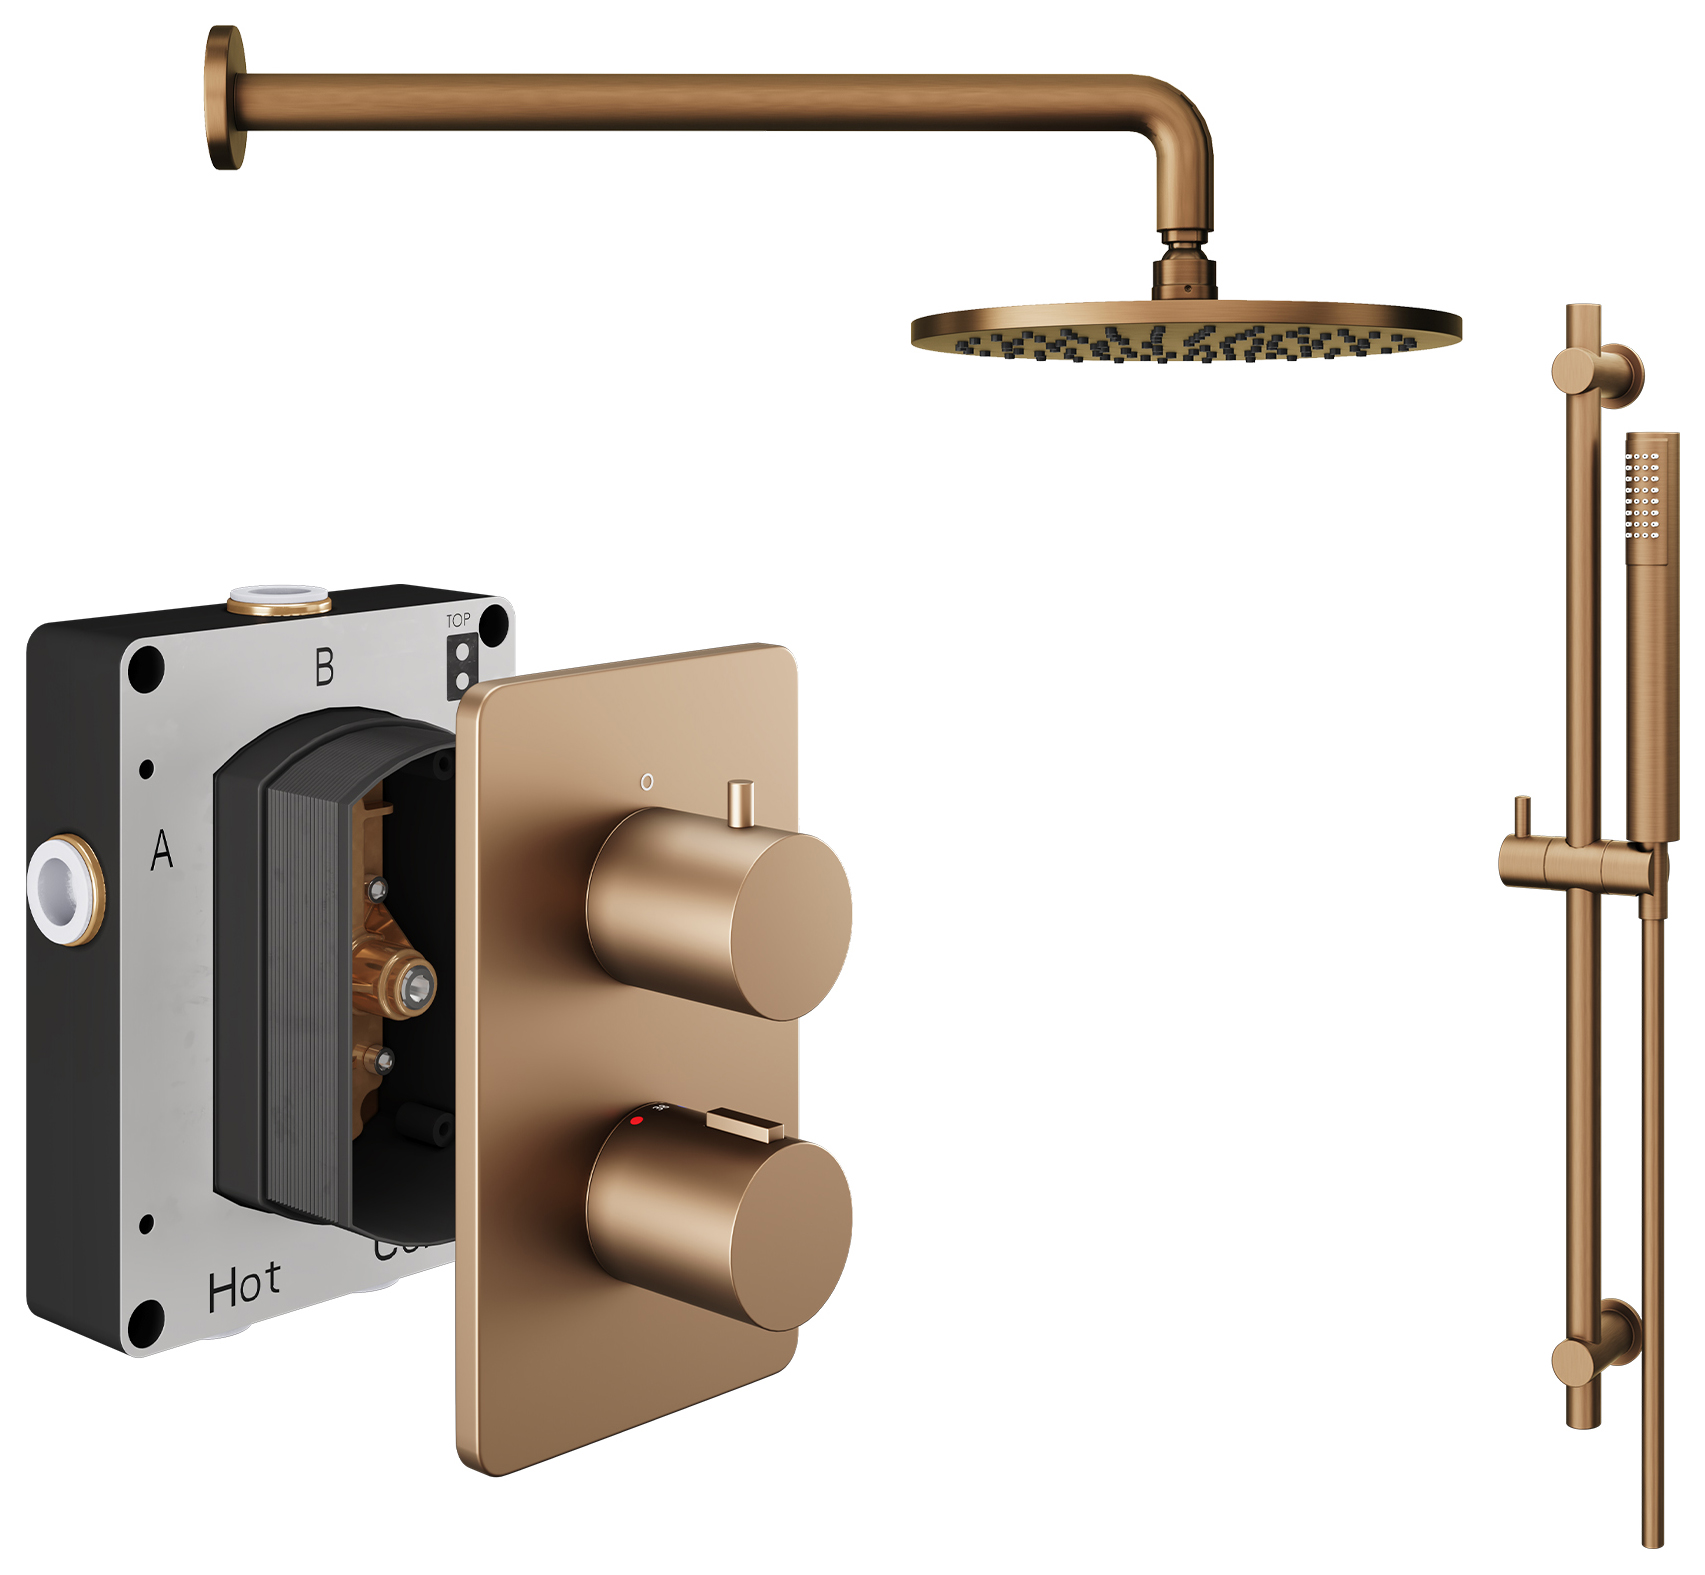 Hadleigh Recessed Dual Control Round Mixer Shower Package Includes head and handset - Brushed Bronze